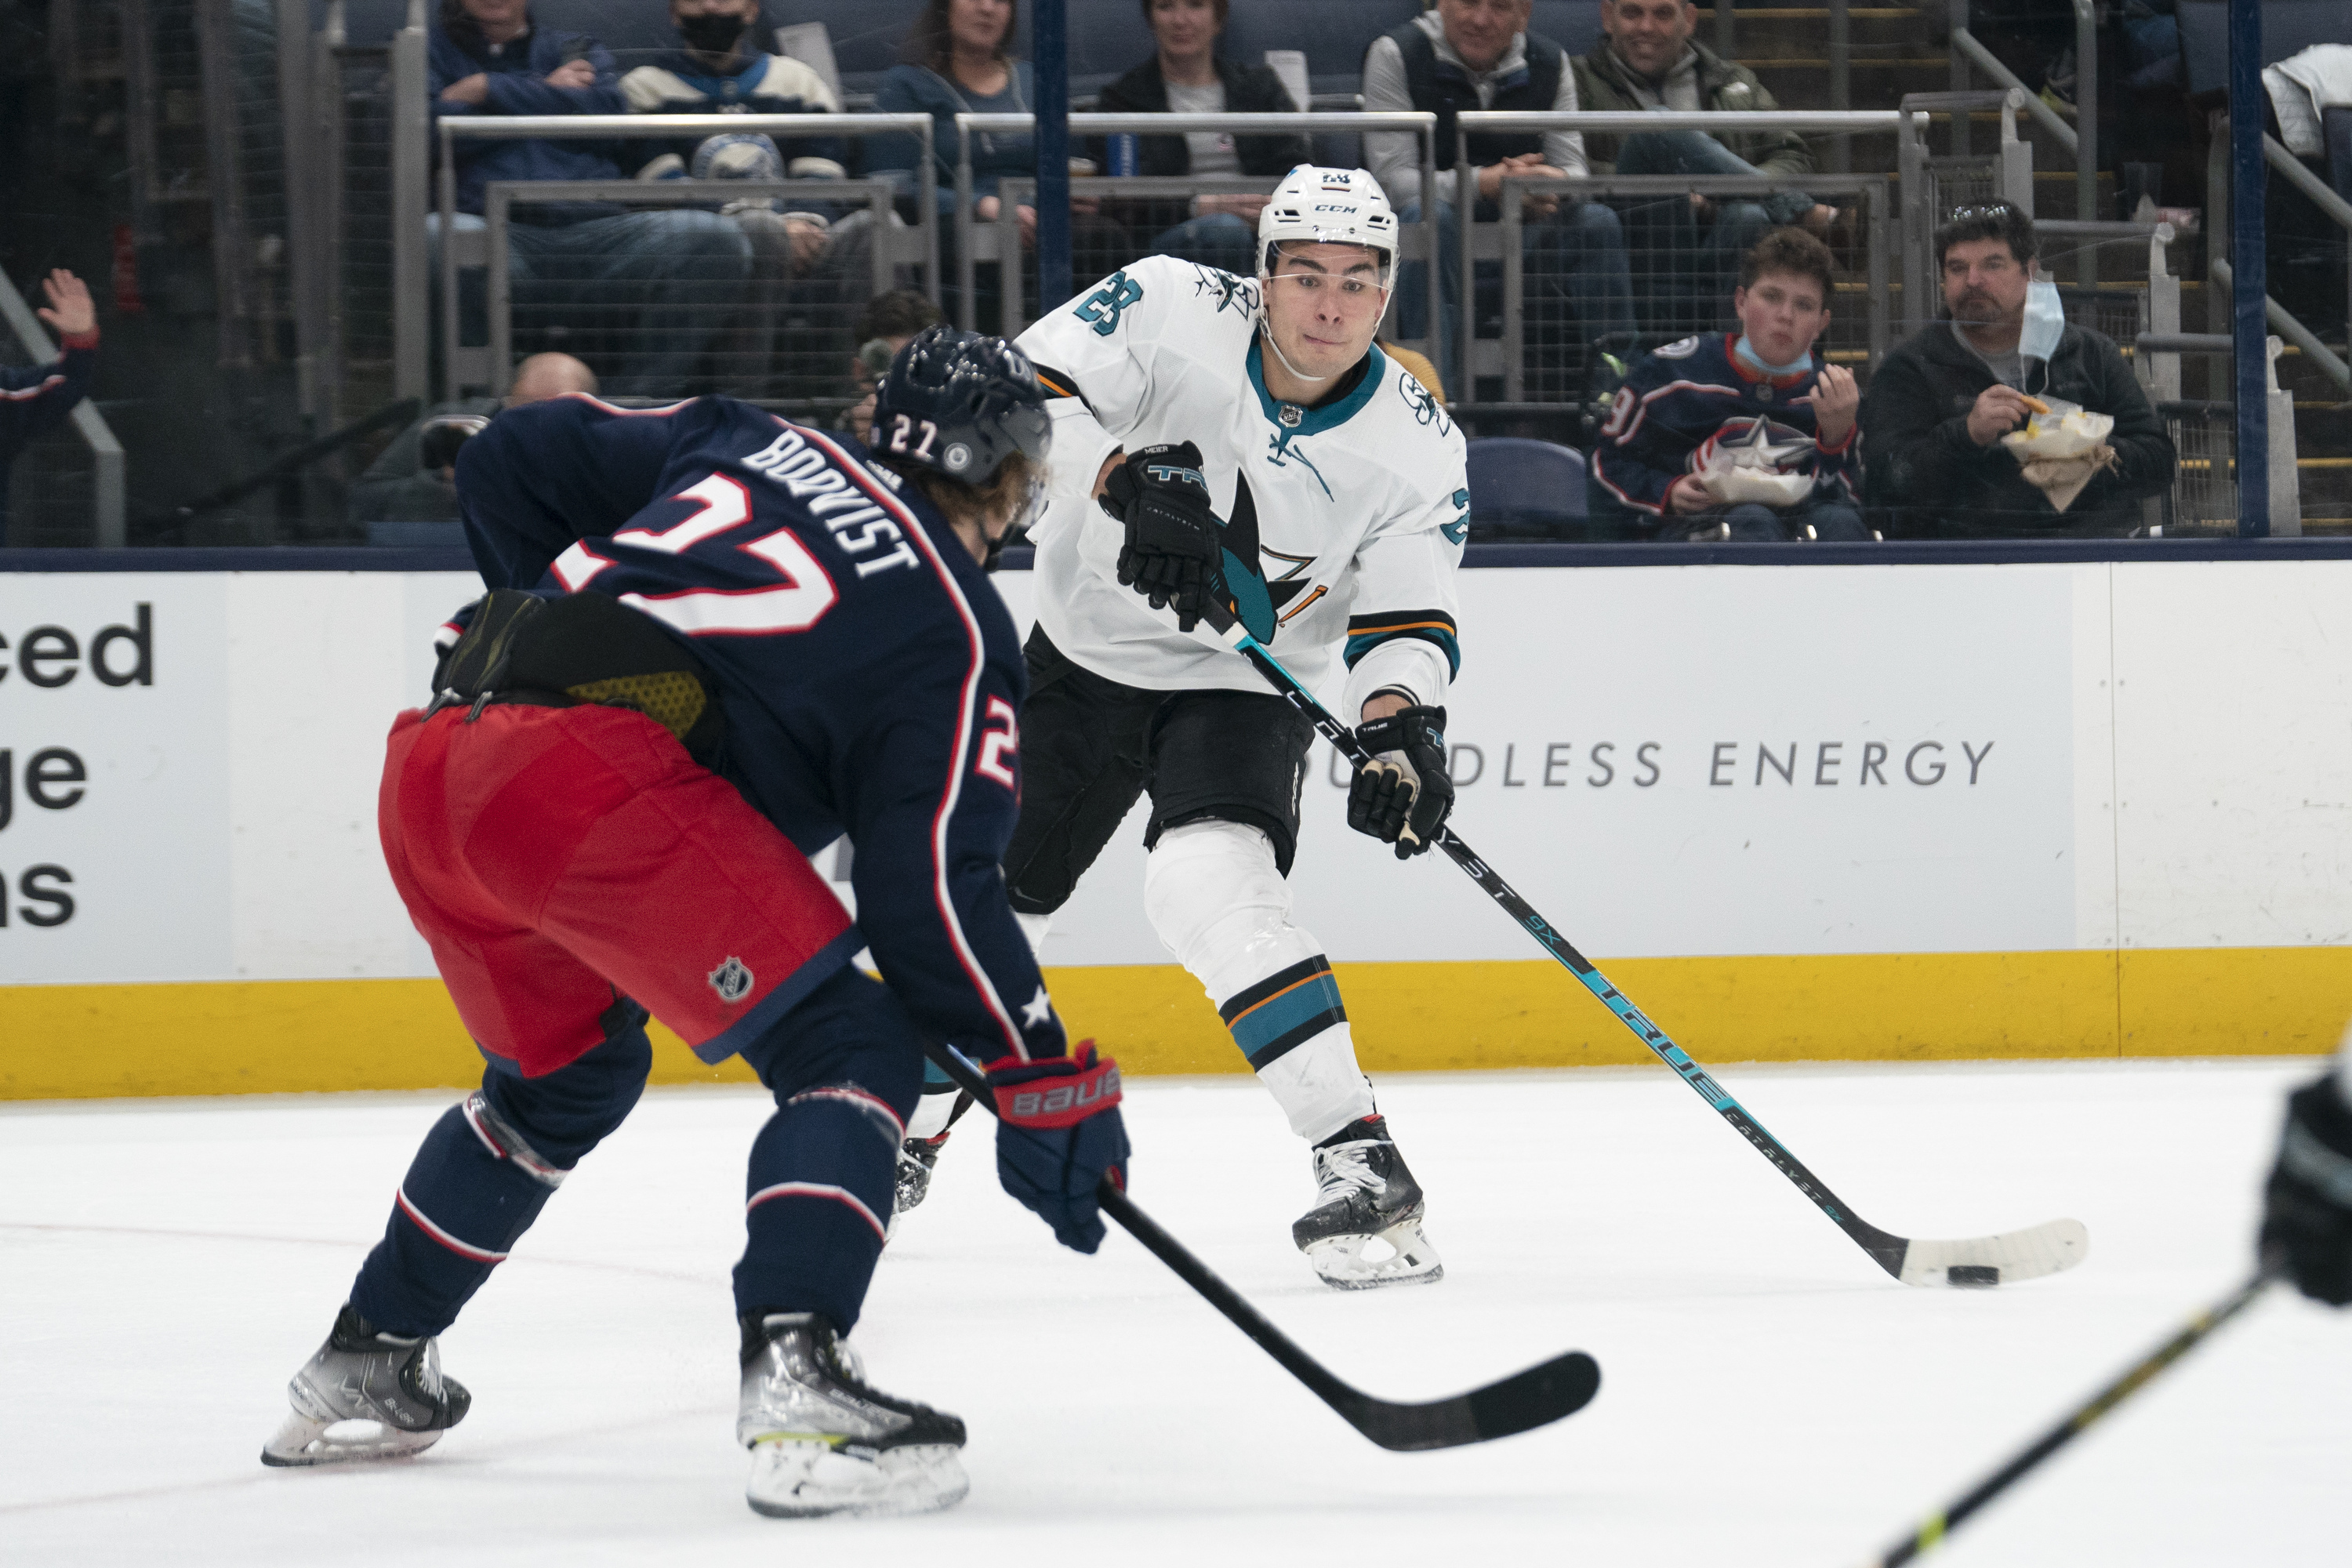 San Jose Sharks right wing Timo Meier #28 passes the puck during the game between the Columbus Blue Jackets and the San Jose Sharks at Nationwide Arena in Columbus, Ohio on December 5, 2021.